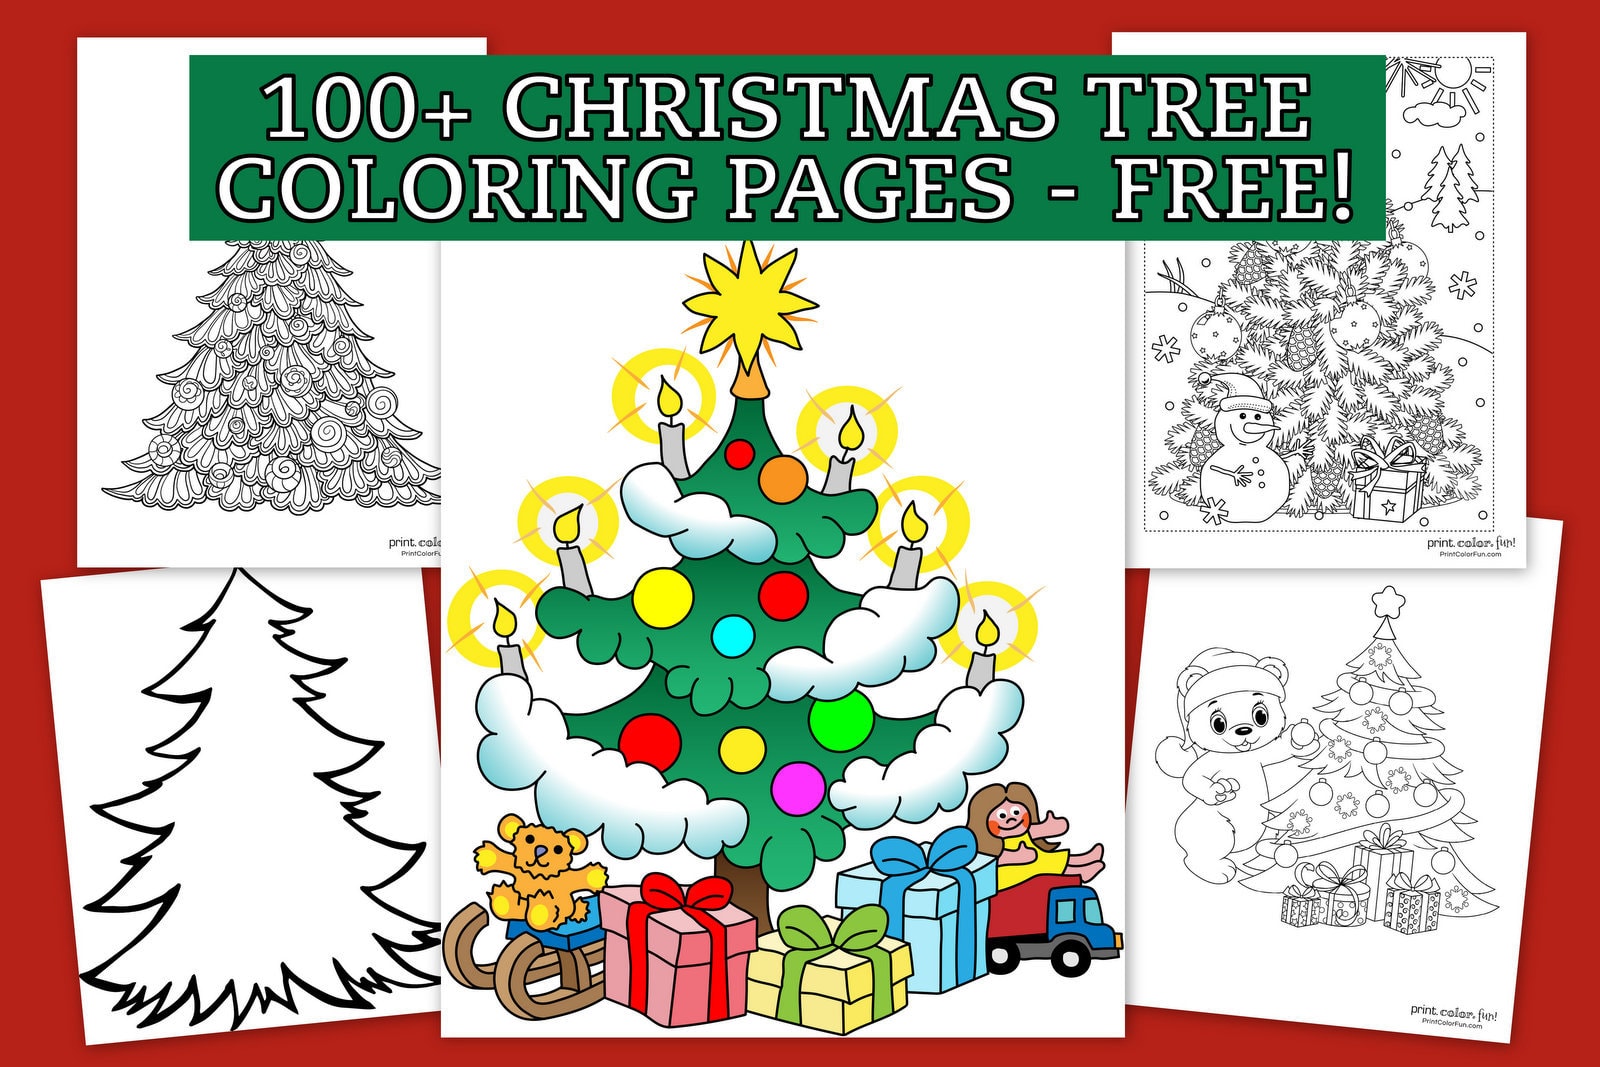 Top 100 Christmas tree coloring pages The ultimate (free!) printable collection